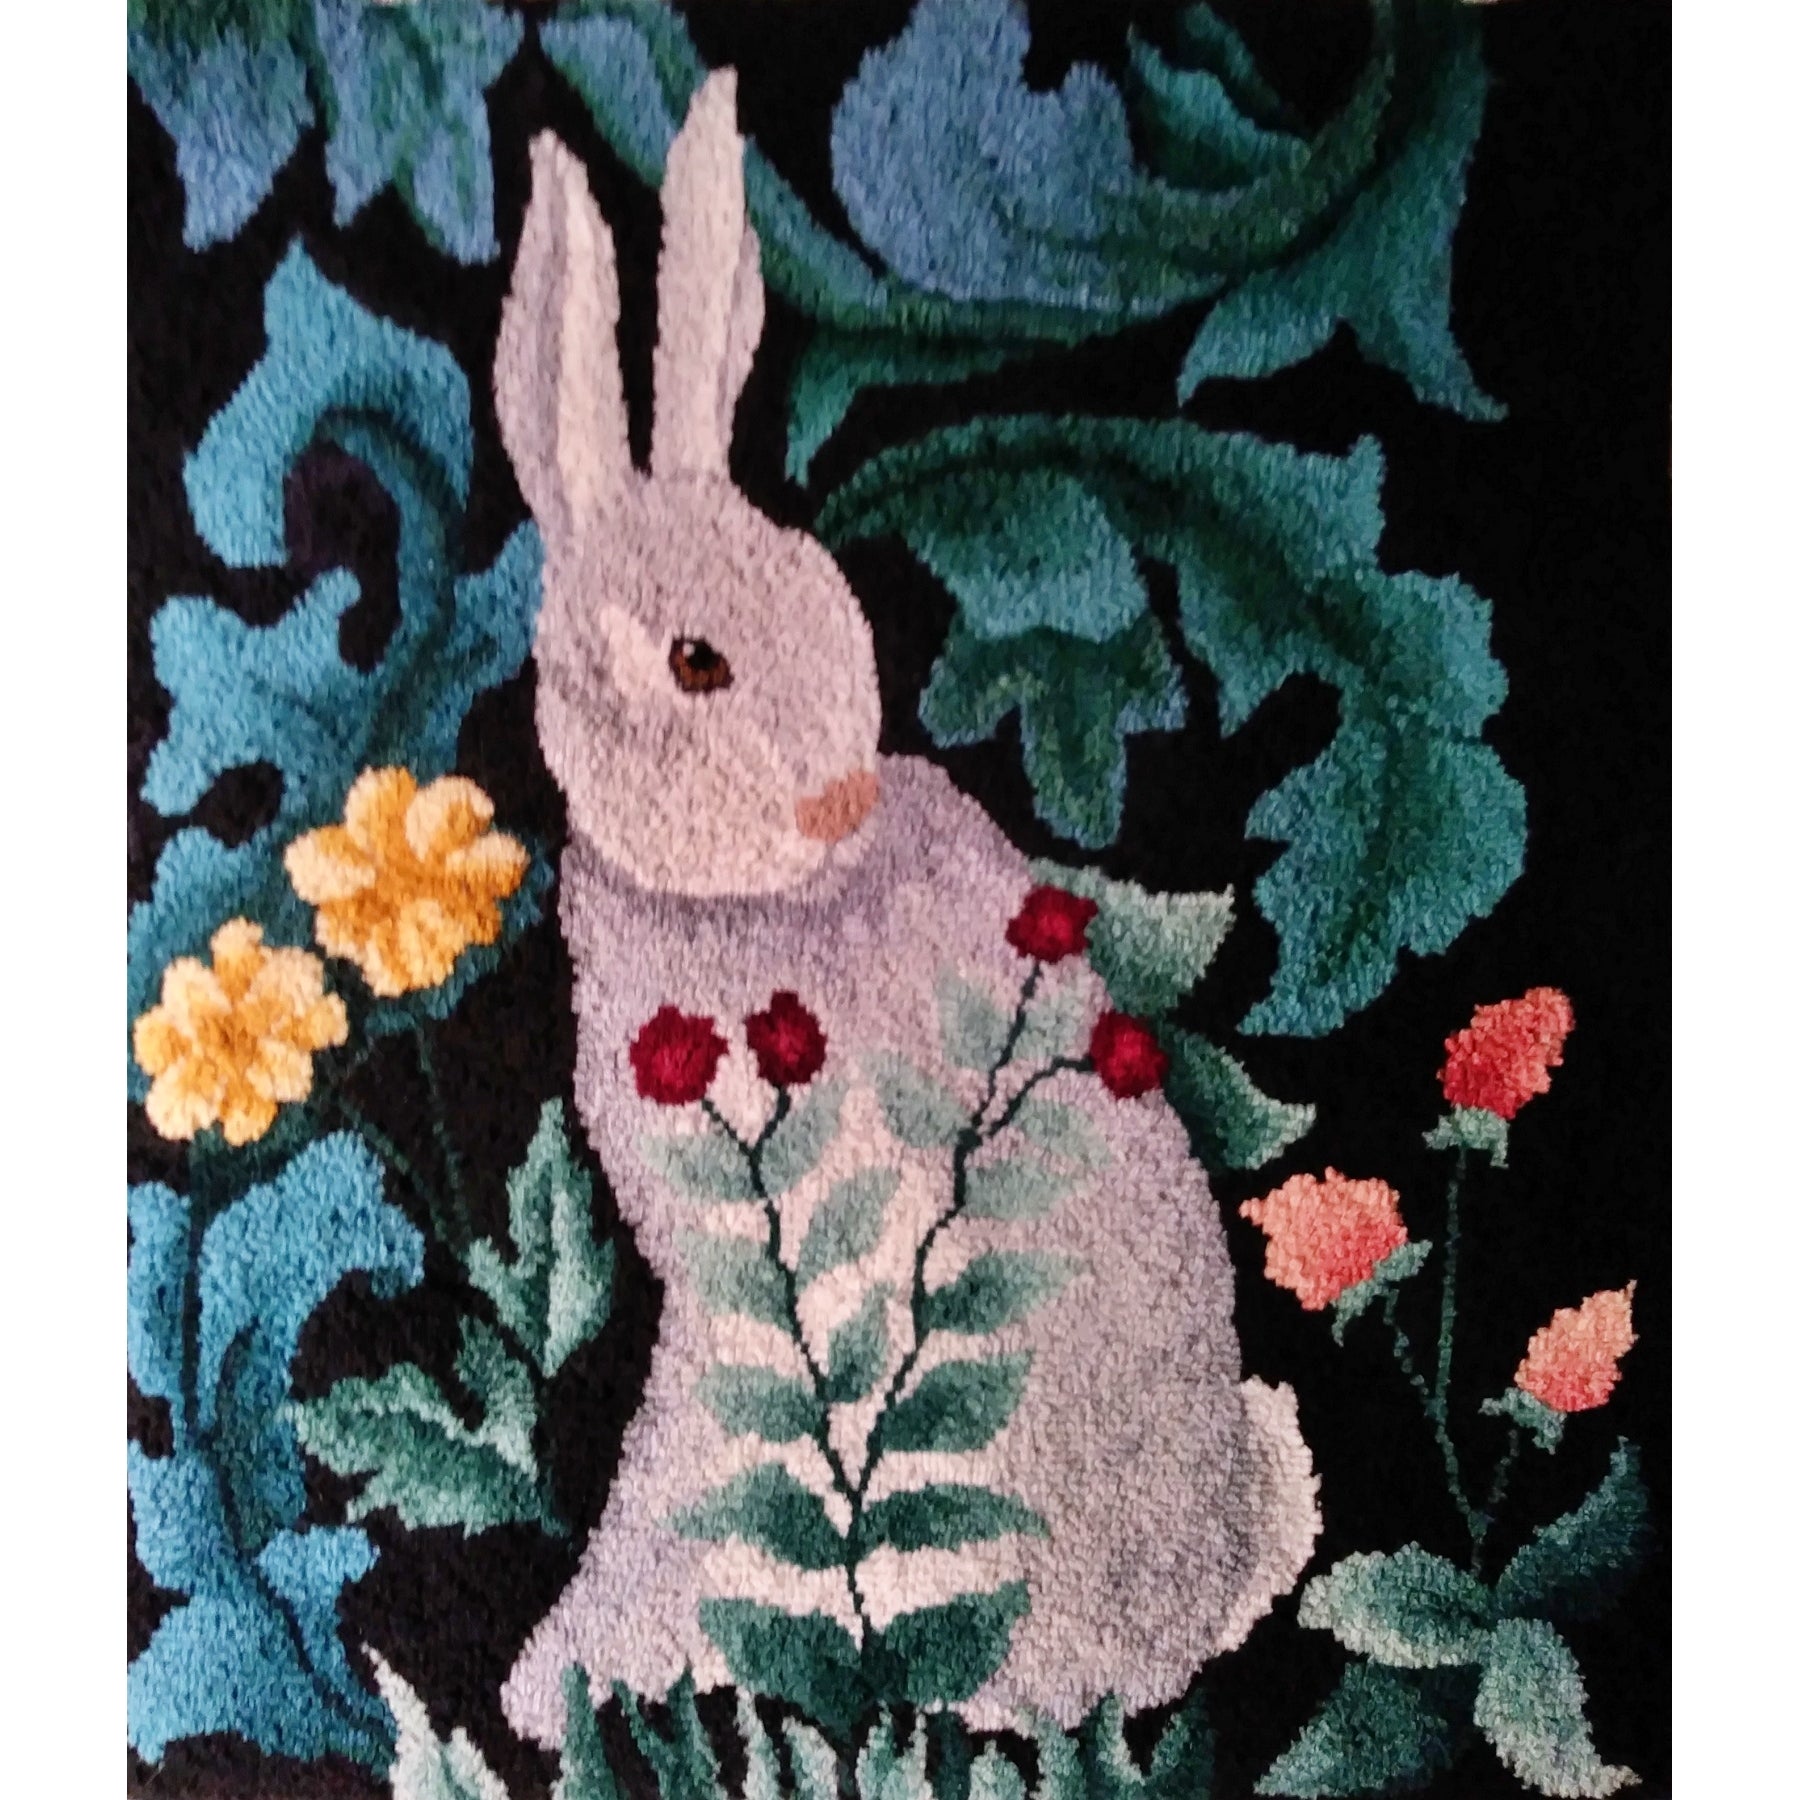 Morris Bunny, rug hooked by Judy Deaton